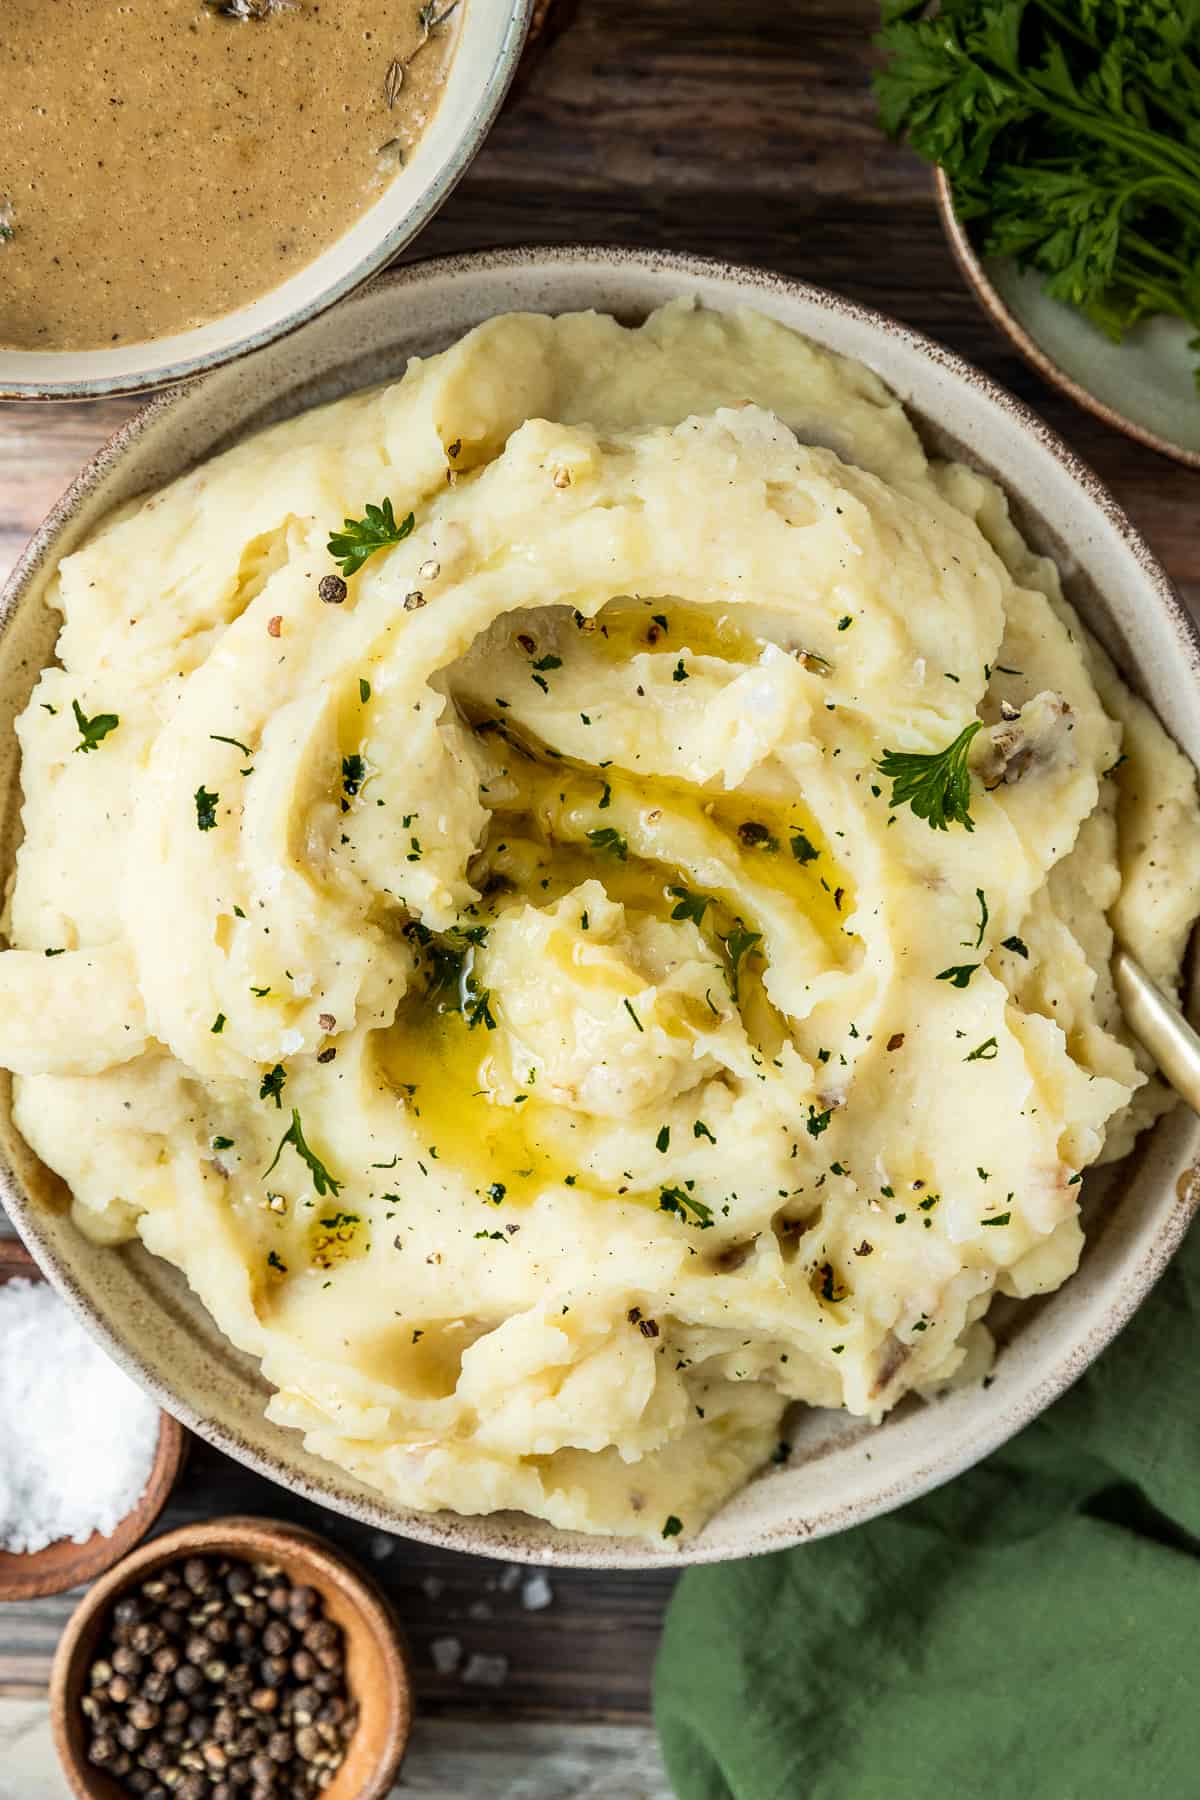 An overview shot of a bowl of mashed potatoes topped with melted butter, pepper, and parsley on a wood backrgound next to a bowl of gravy and pepper.